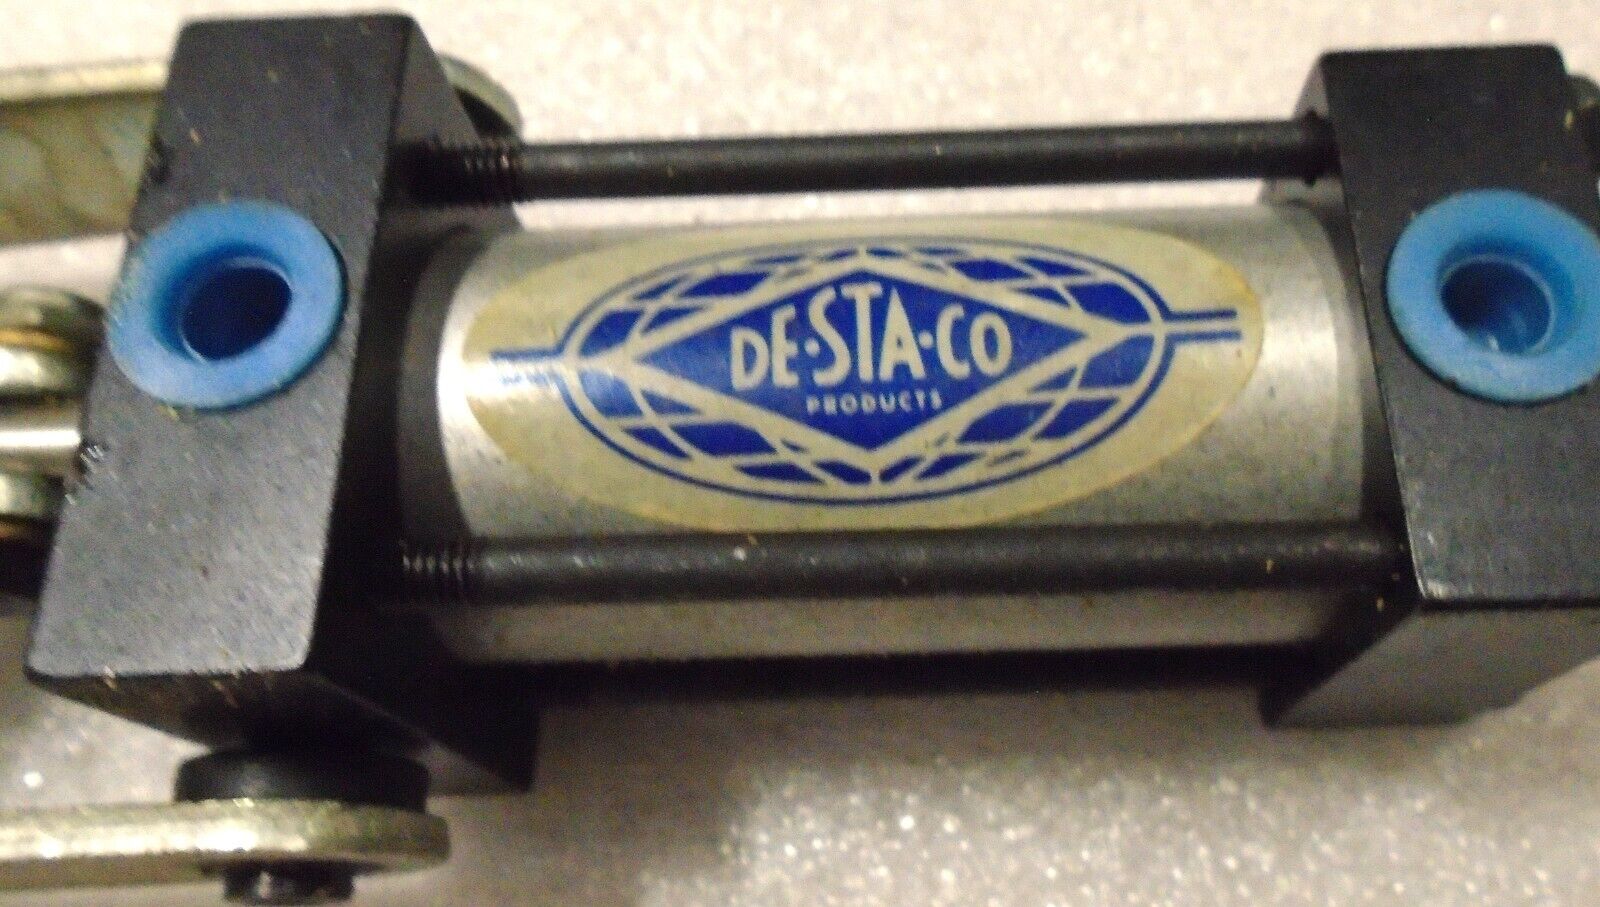 DESTACO. 803 TOGGLE CLAMPS, (old stock), Brand new